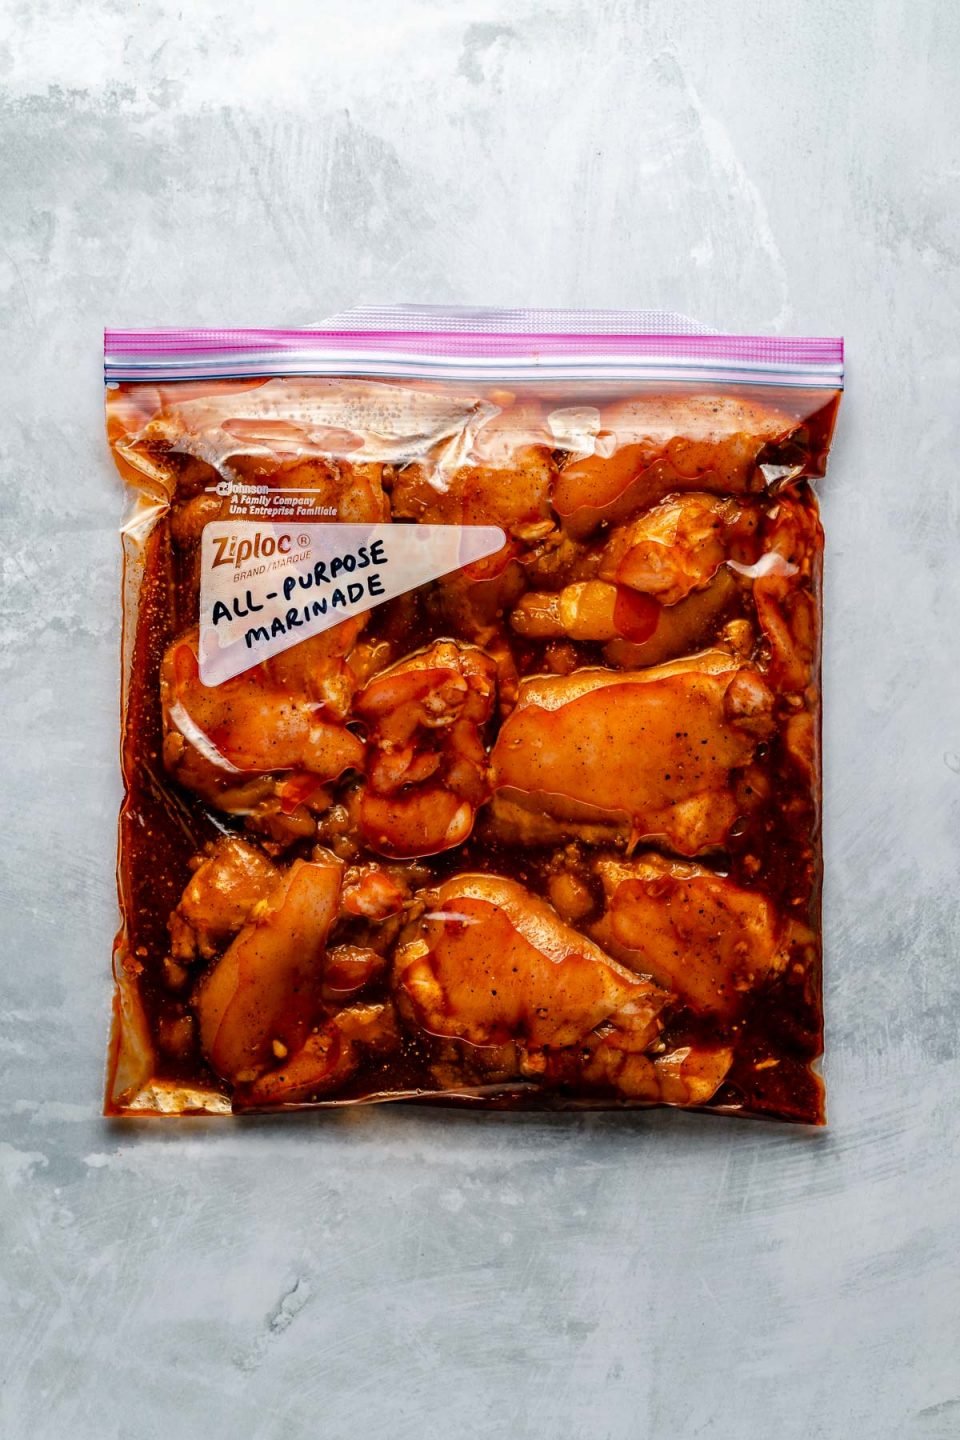 Chicken thighs in a Ziploc bag, marinating in All-Purpose marinade. The bag sits atop a light blue surface. “All-Purpose Marinade" is penned in the bag's memo area.